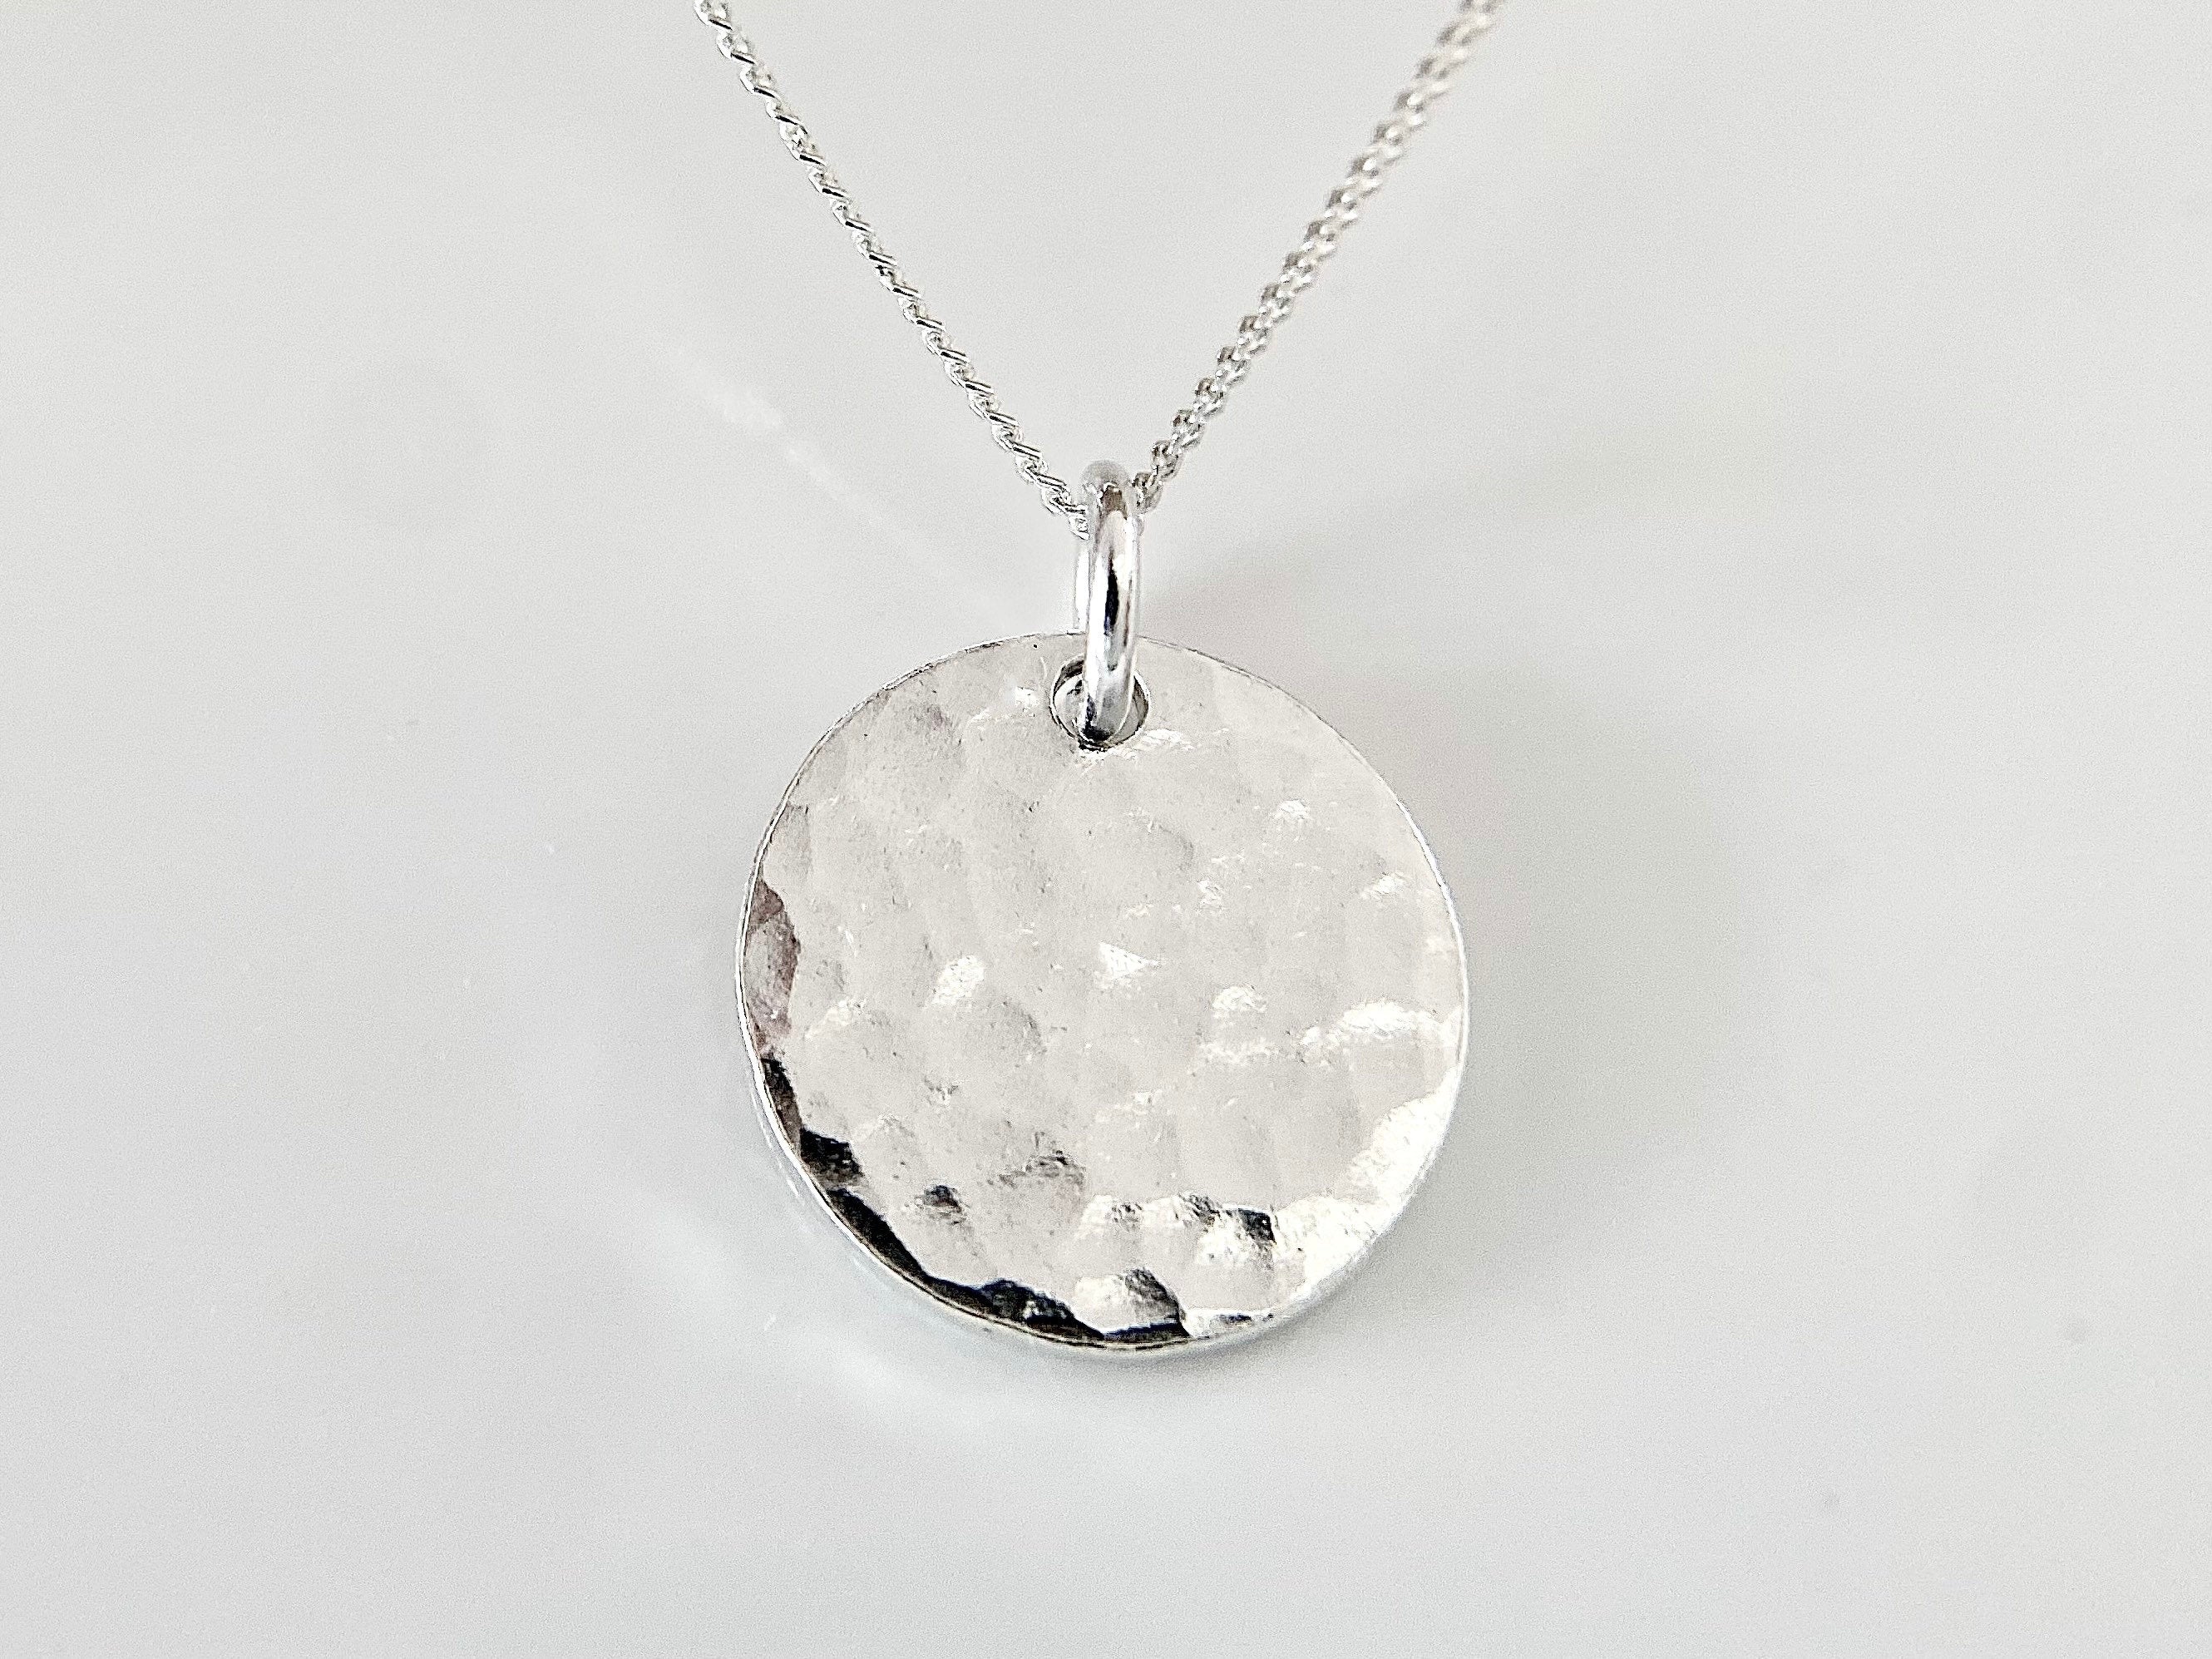 Hammered Sterling Silver Circle Necklace, Hammered Silver Circle Pendant, Silver  Necklace, Simple Necklace, Hammered Circle Jewellery - Etsy